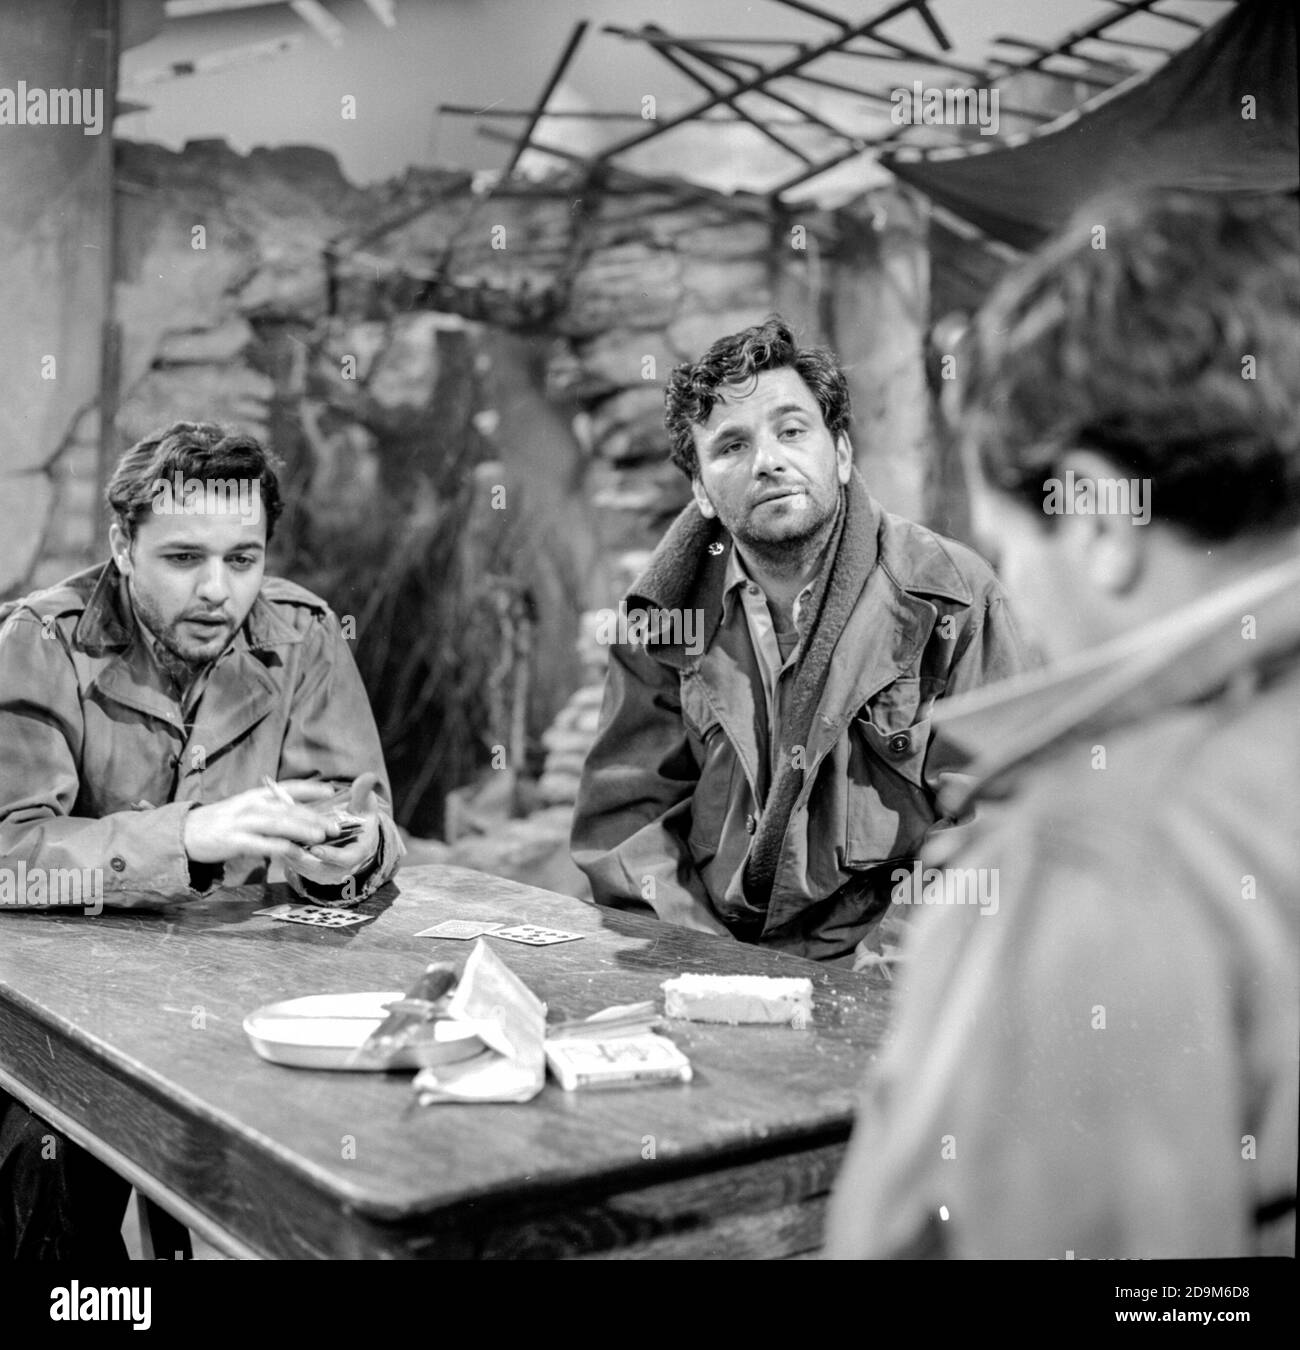 Sal Mineo and Peter Falk appear in the play A Sound of Hunting on the American TV drama anthology series The Dupont Show of the Week, broadcast on 20th May 1962 by NBC. It is a WWII drama set in Monte Cassino, Italy. Stock Photo